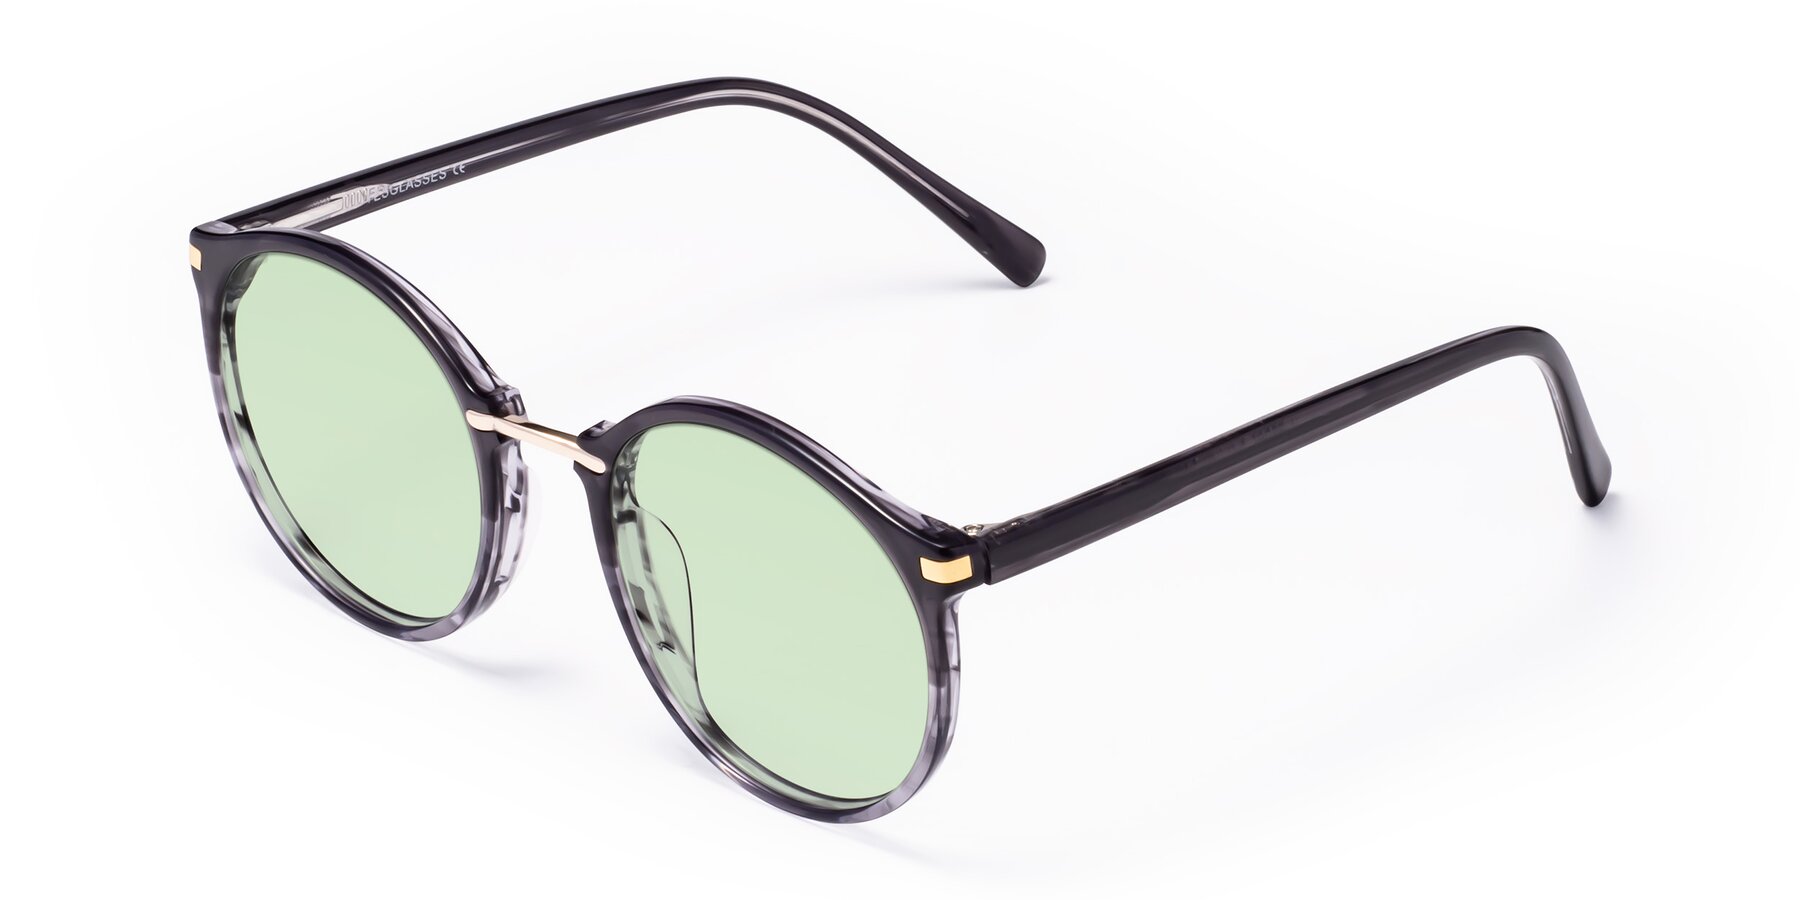 Angle of Casper in Translucent Black with Light Green Tinted Lenses